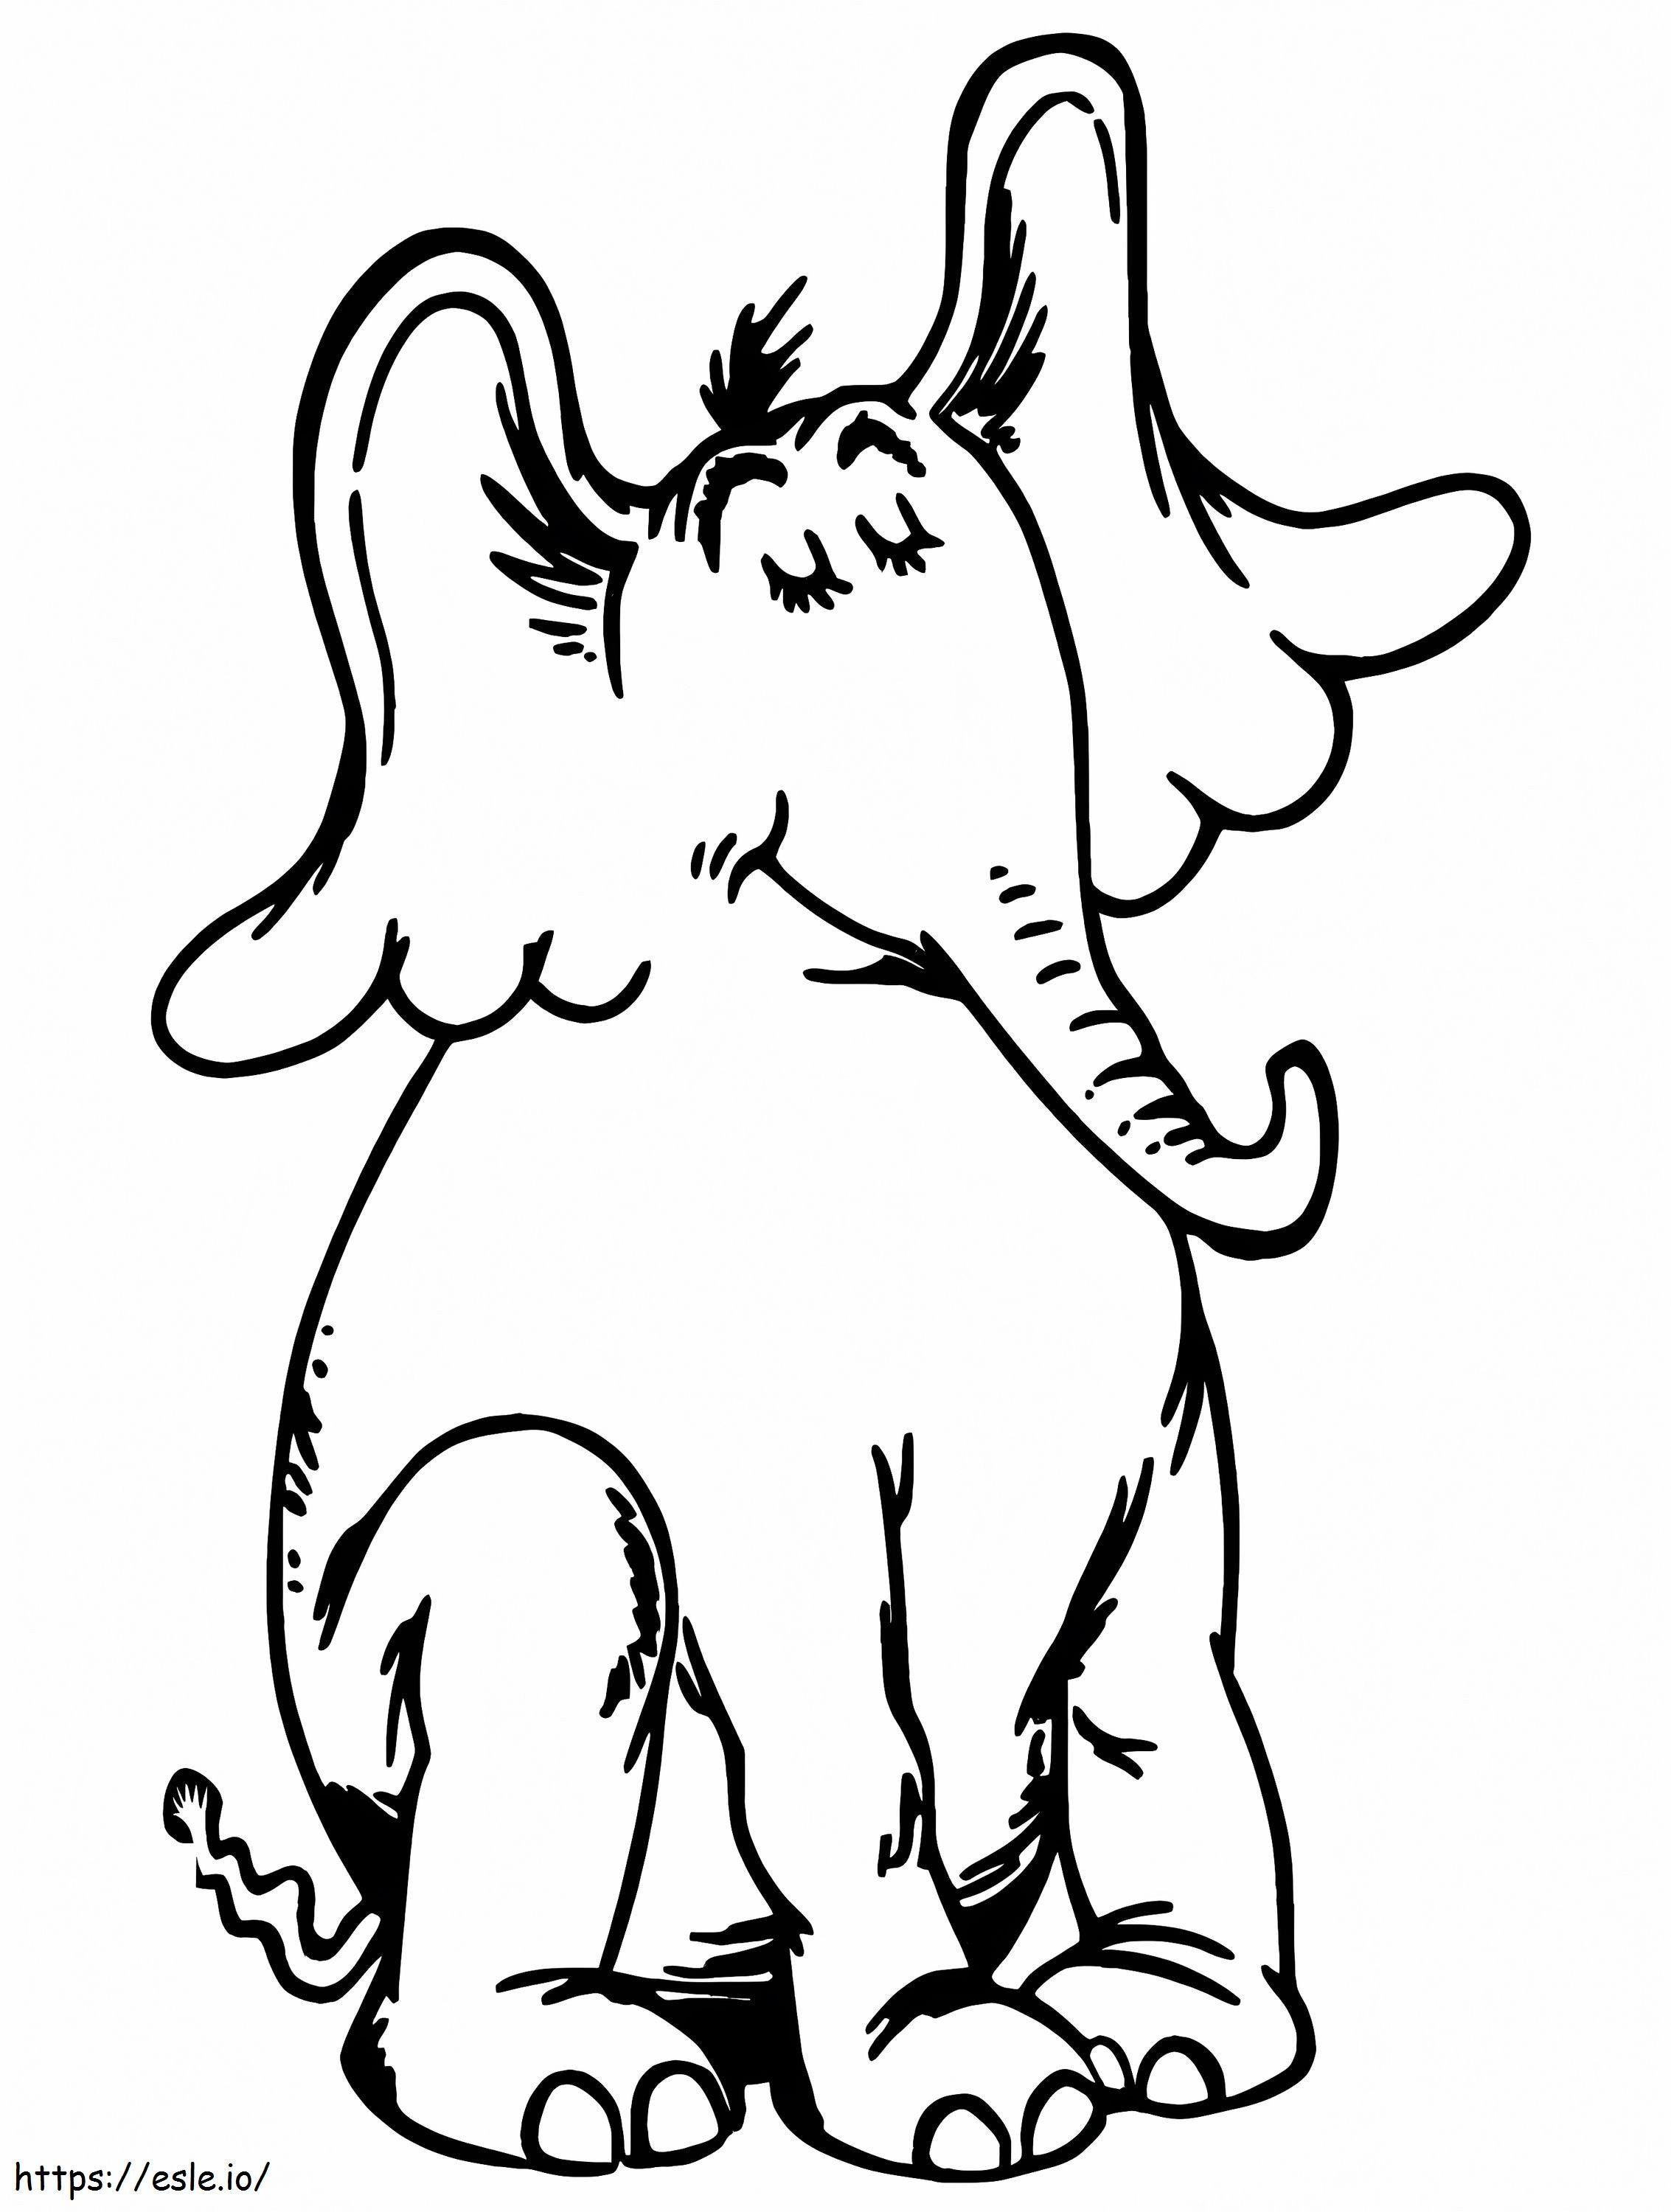 Horton The Elephant 1 coloring page